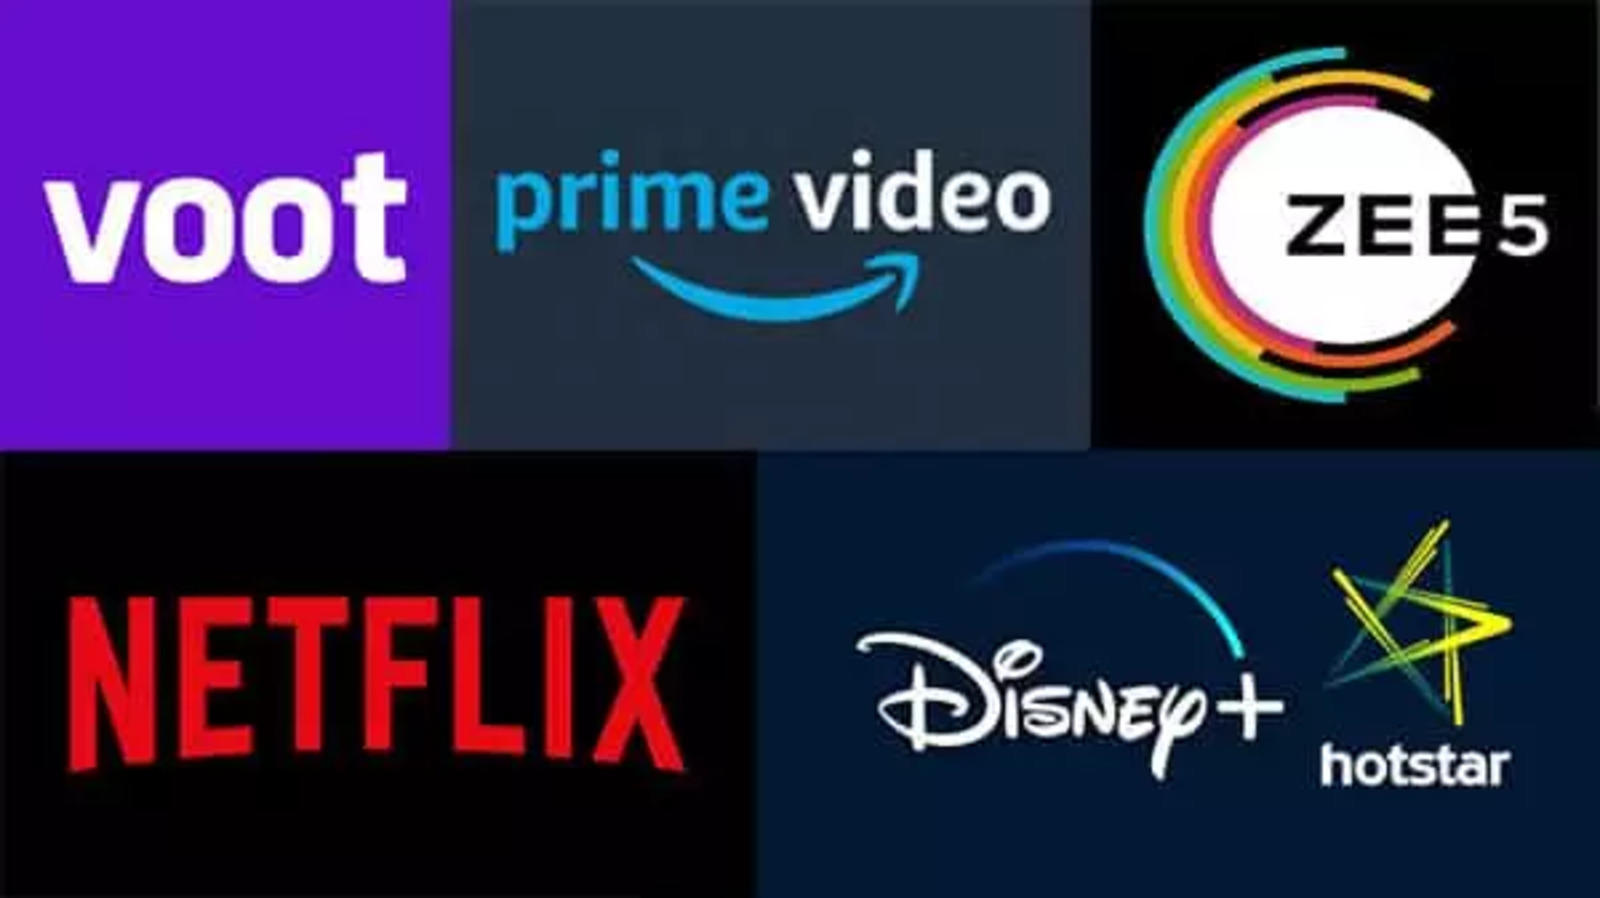 Airtel और Jio में किसका Netflix प्लान ज्यादा बेस्ट? देखें

BUSINESS NEWS Netflix is ​​a famous OTT platform. Many movies, shows, documentaries and web series are available in this platform. Whose Netflix plan is better between Airtel and Jio? see